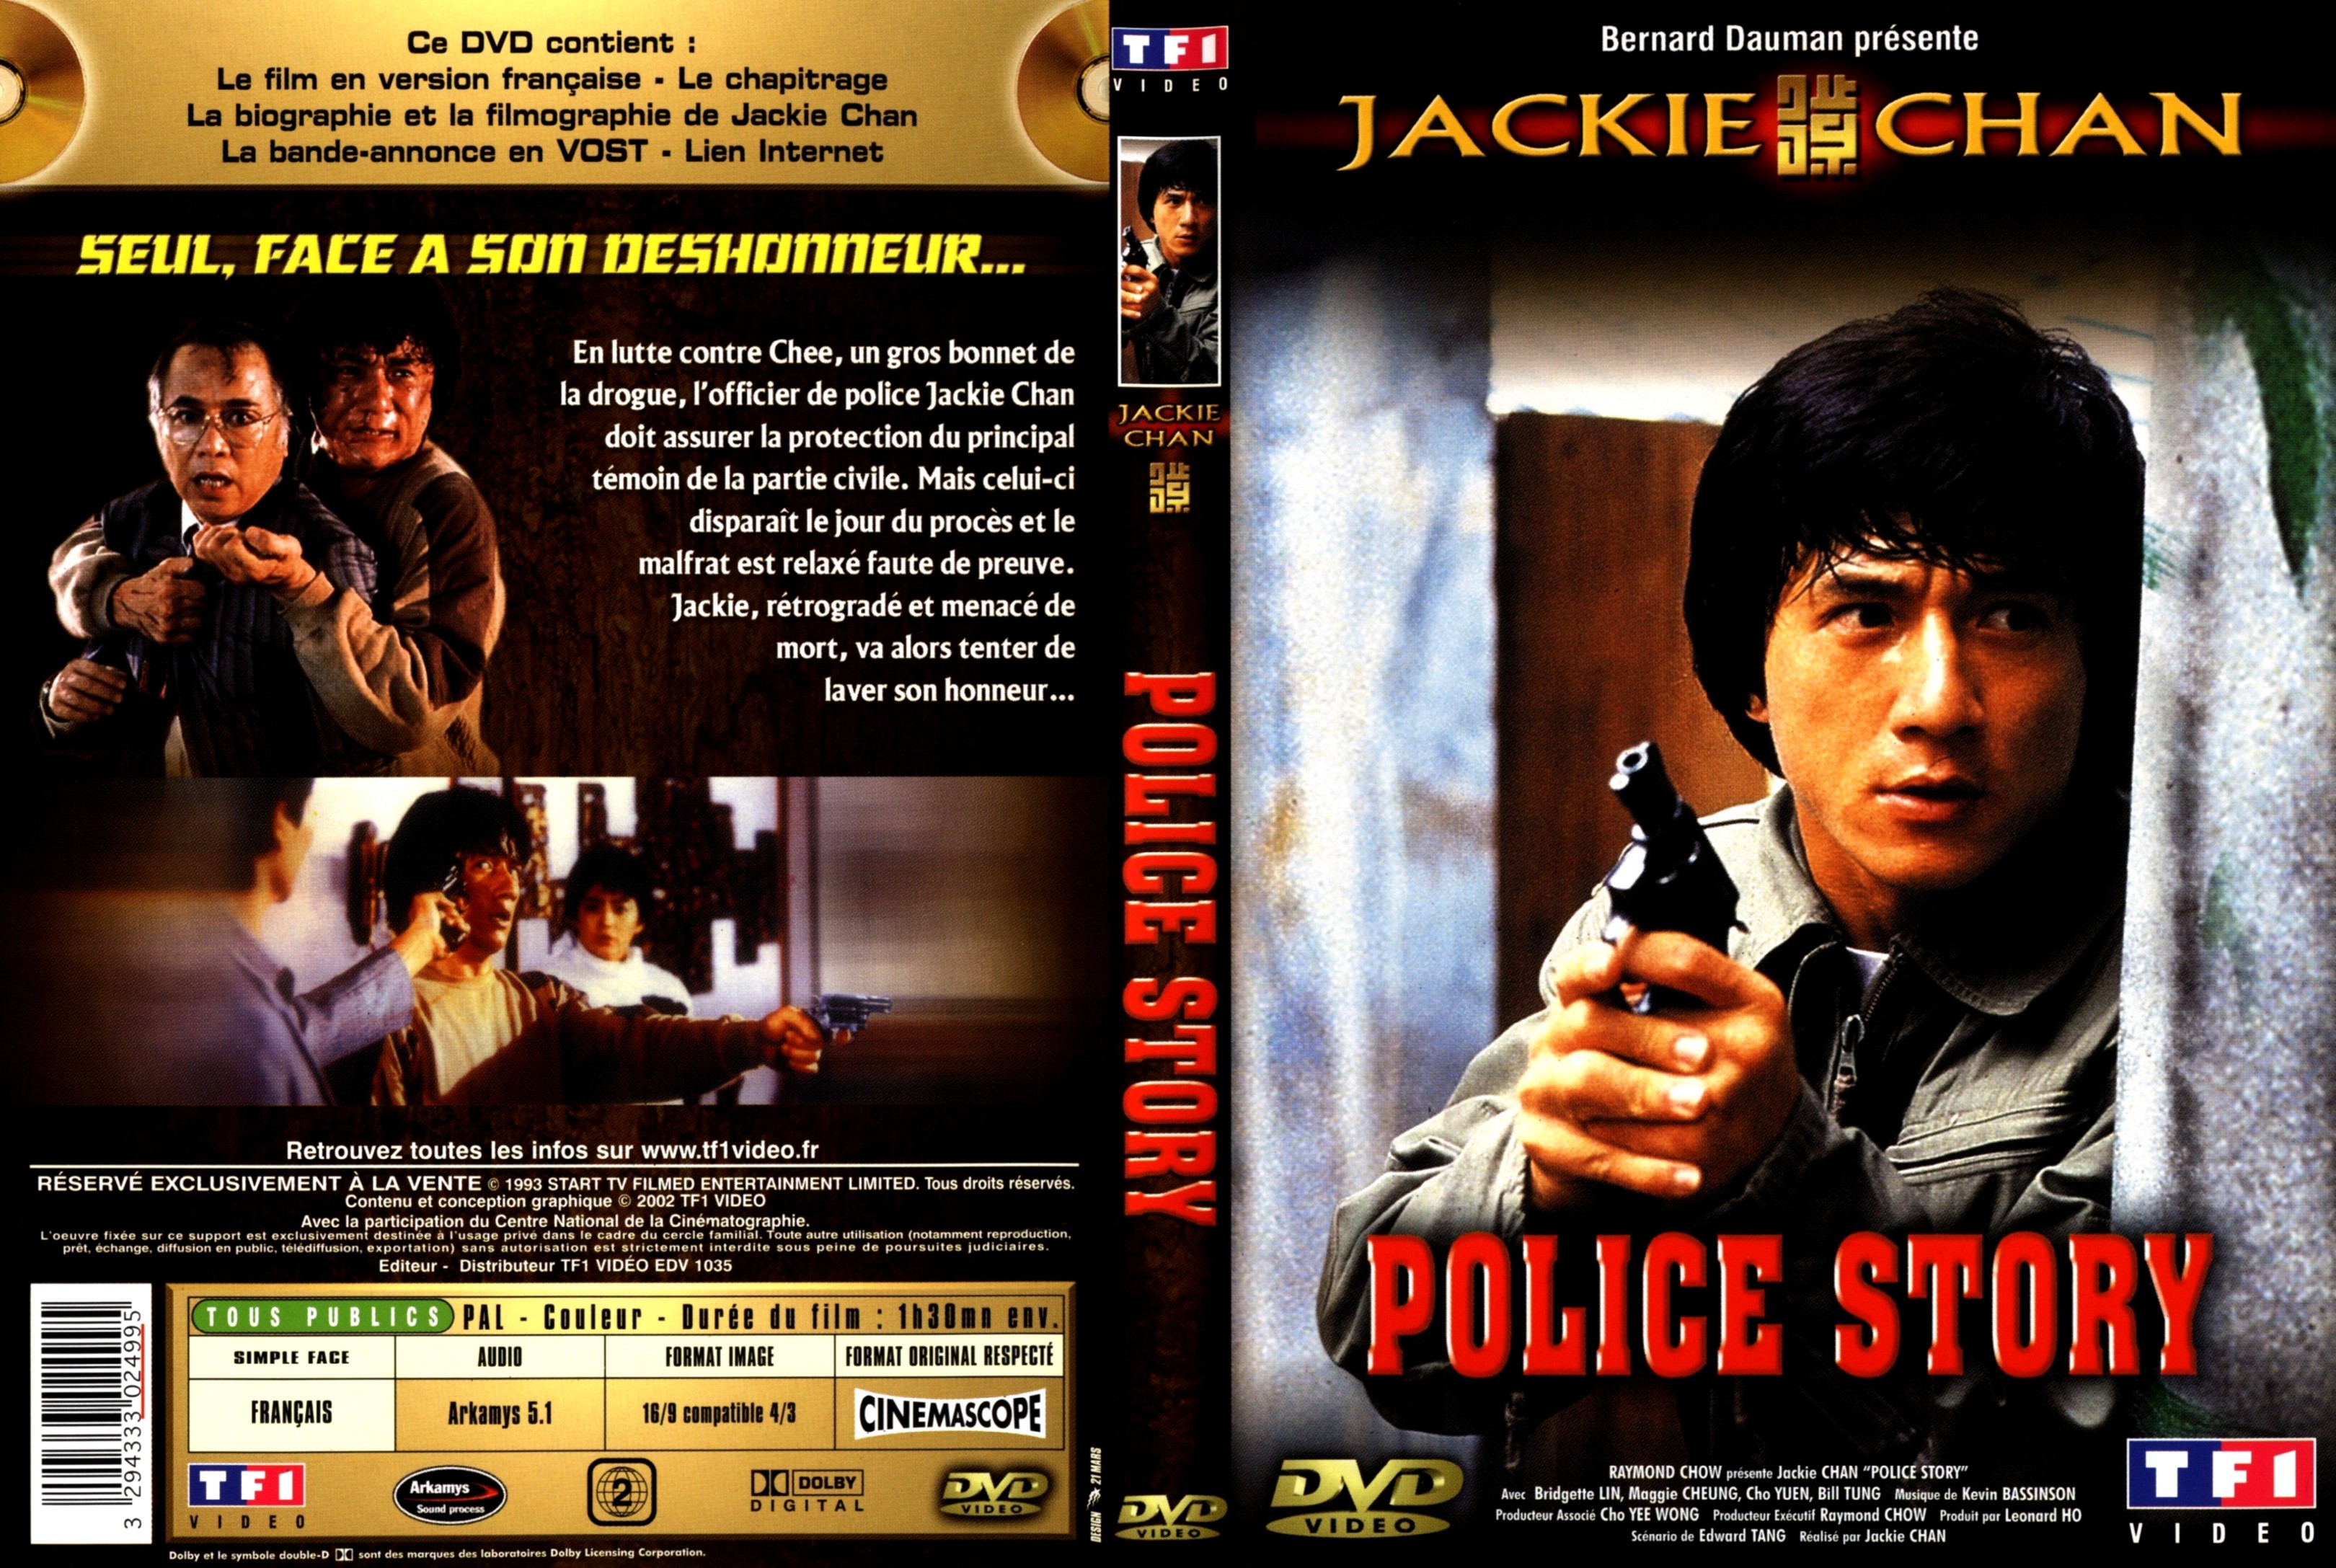 Jaquette DVD Police story